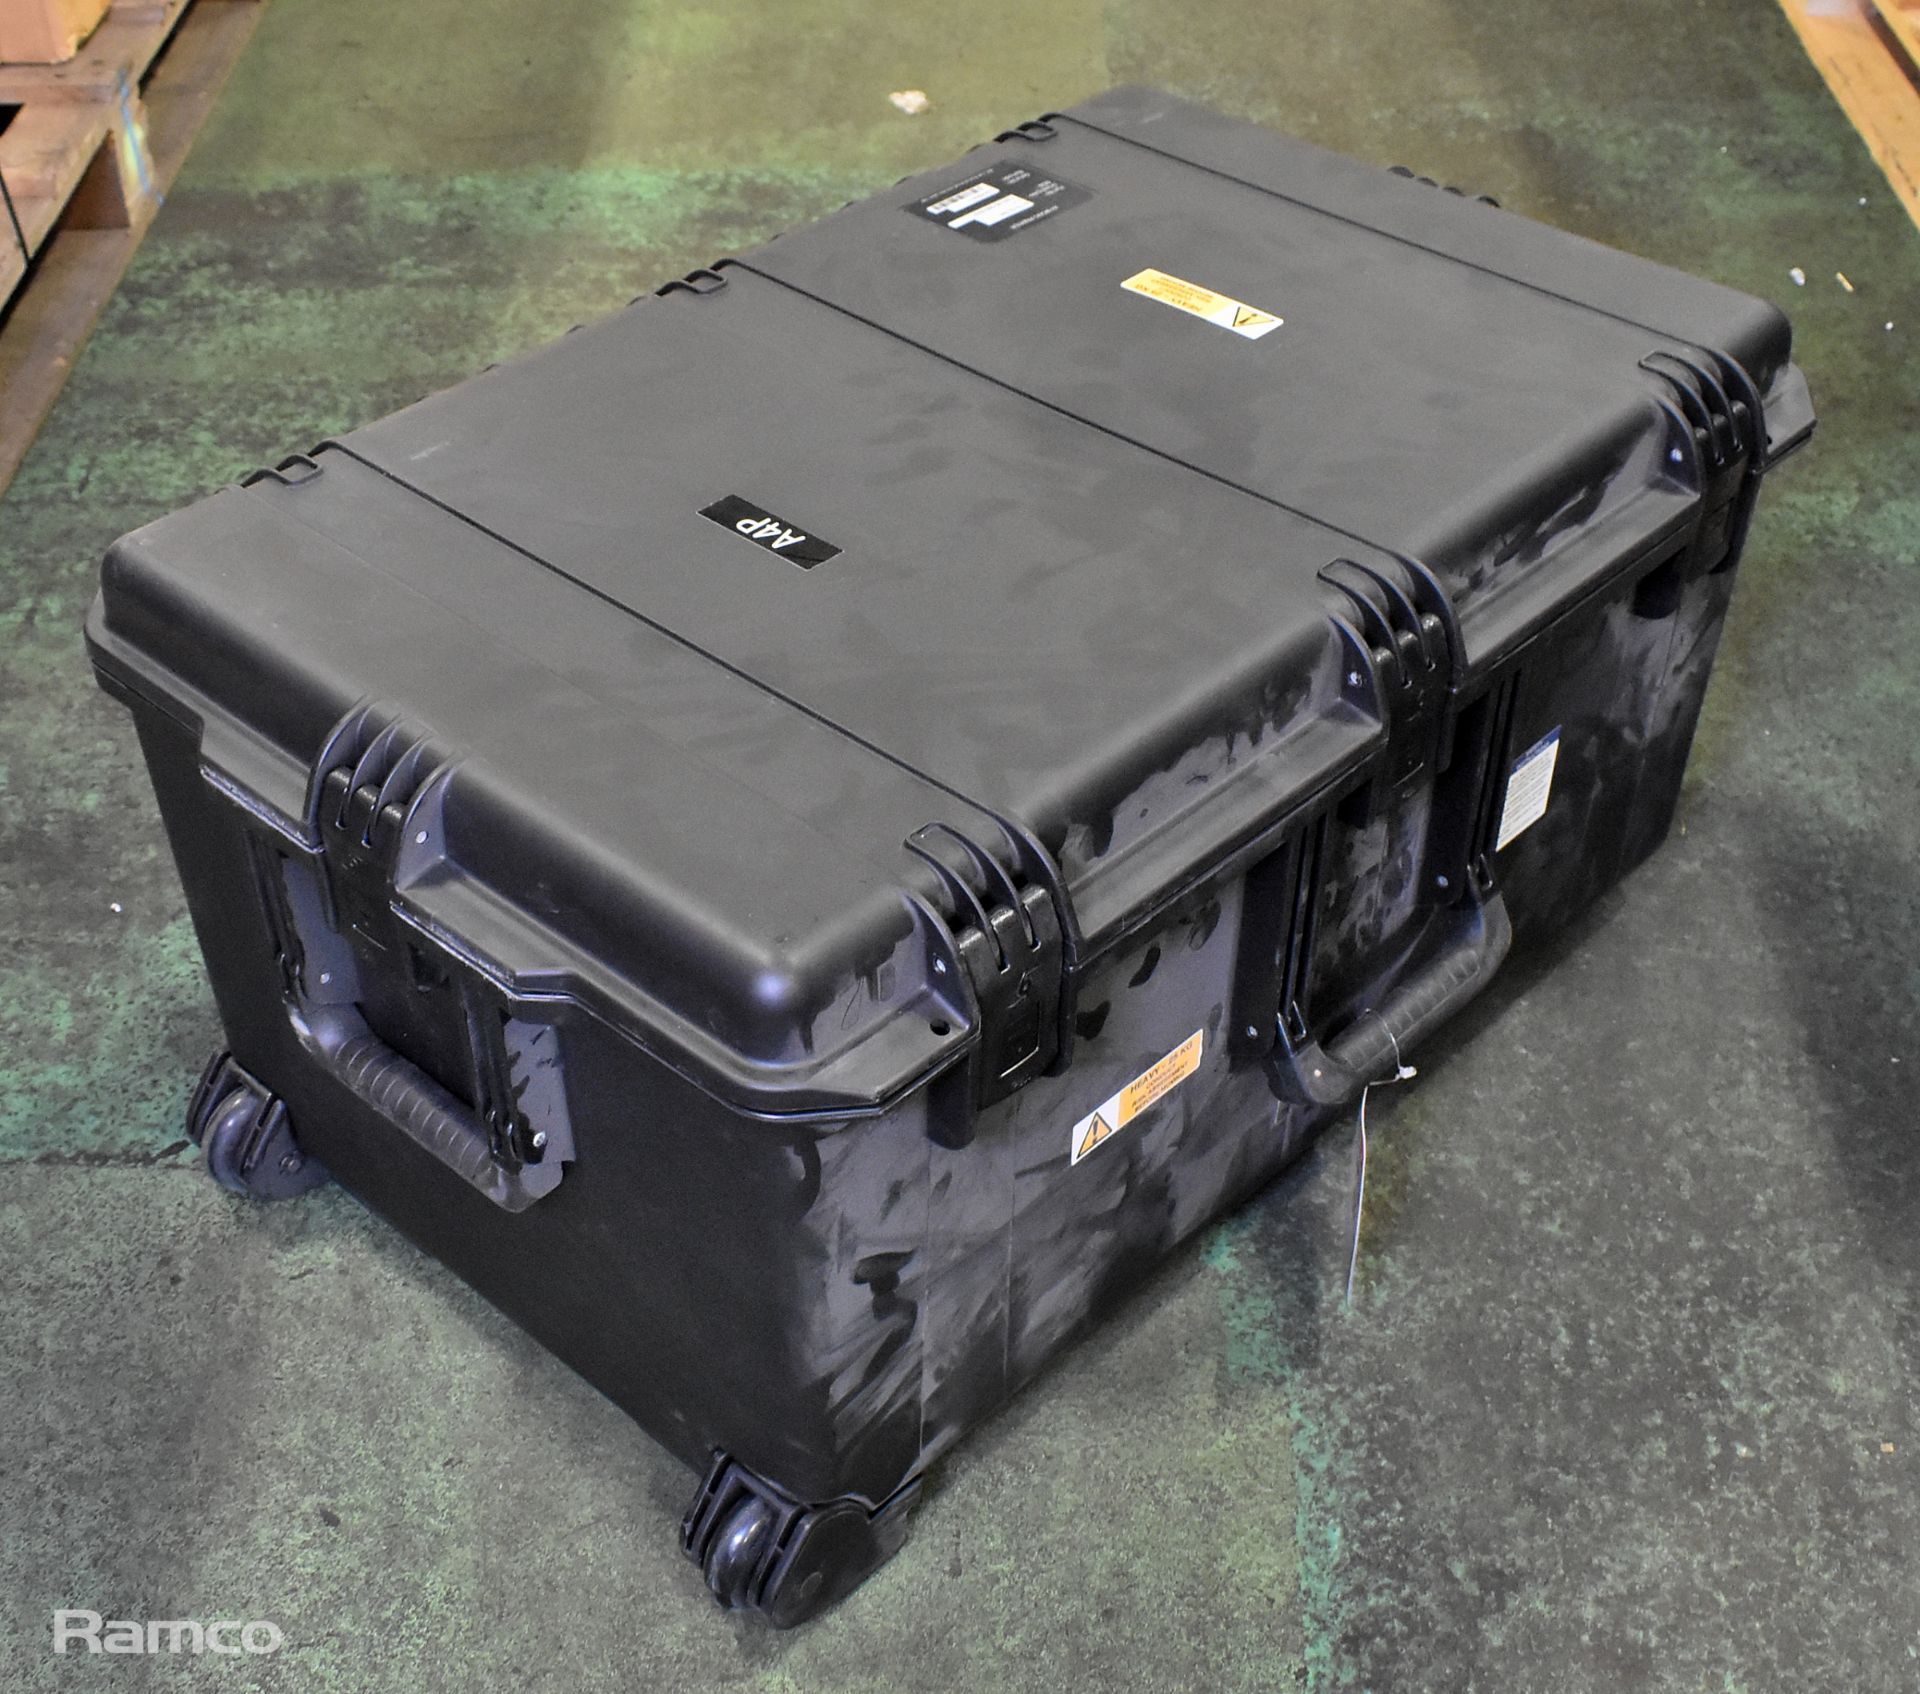 Peli-Storm IM2975 shipping and storage case with foam - external dimensions: L 795 x W 518 x H 394mm